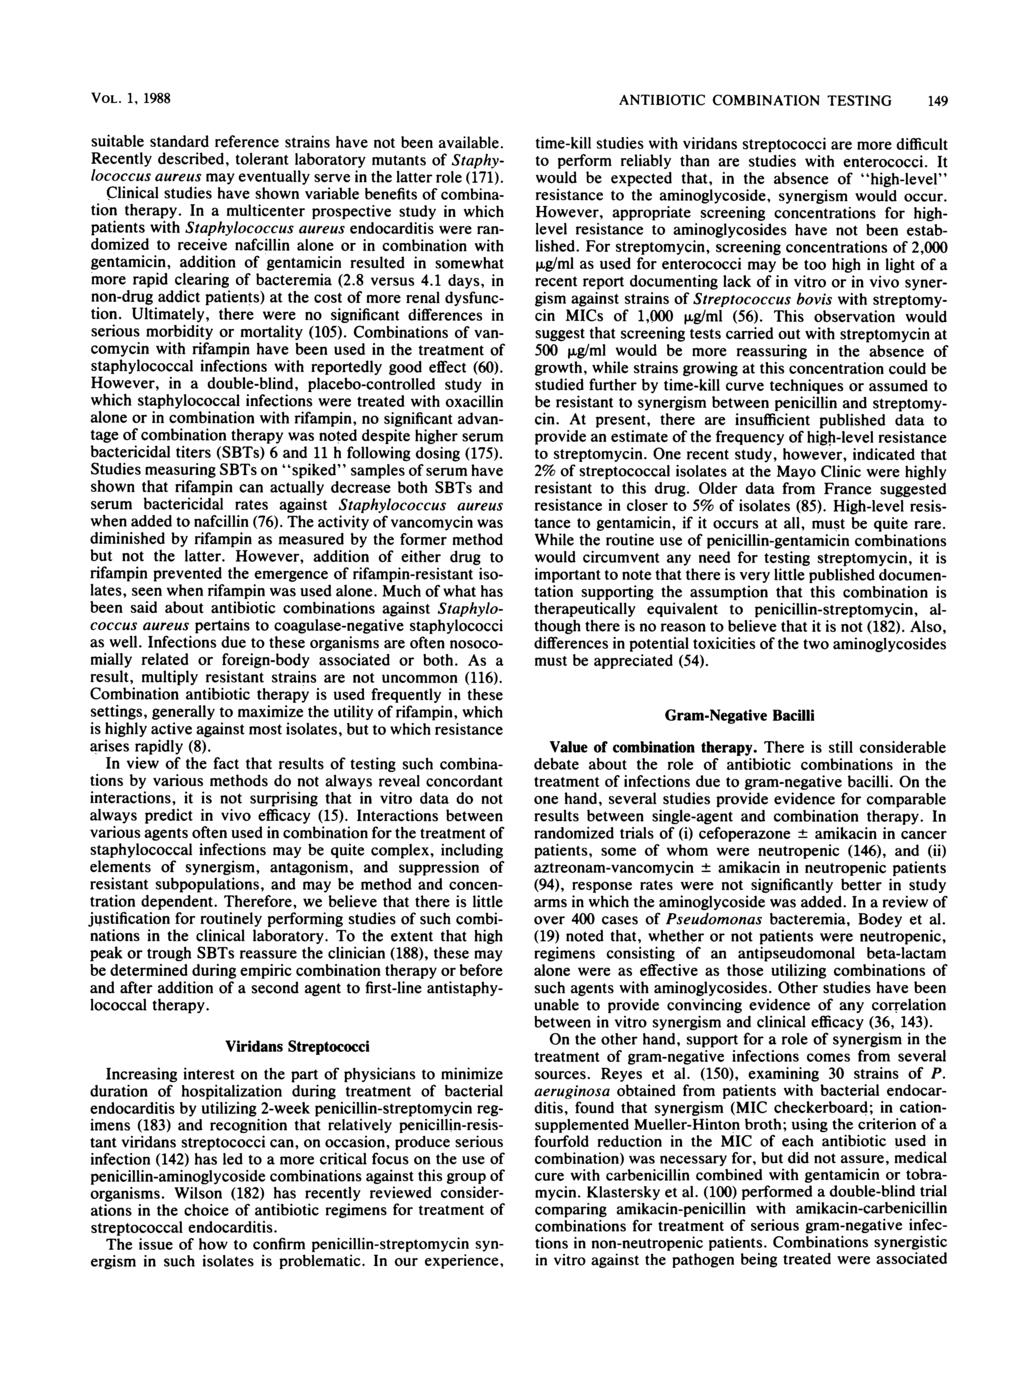 VOL. 1, 1988 suitable standard reference strains have not been available. Recently described, tolerant laboratory mutants of Staphylococcus aureus may eventually serve in the latter role (171).